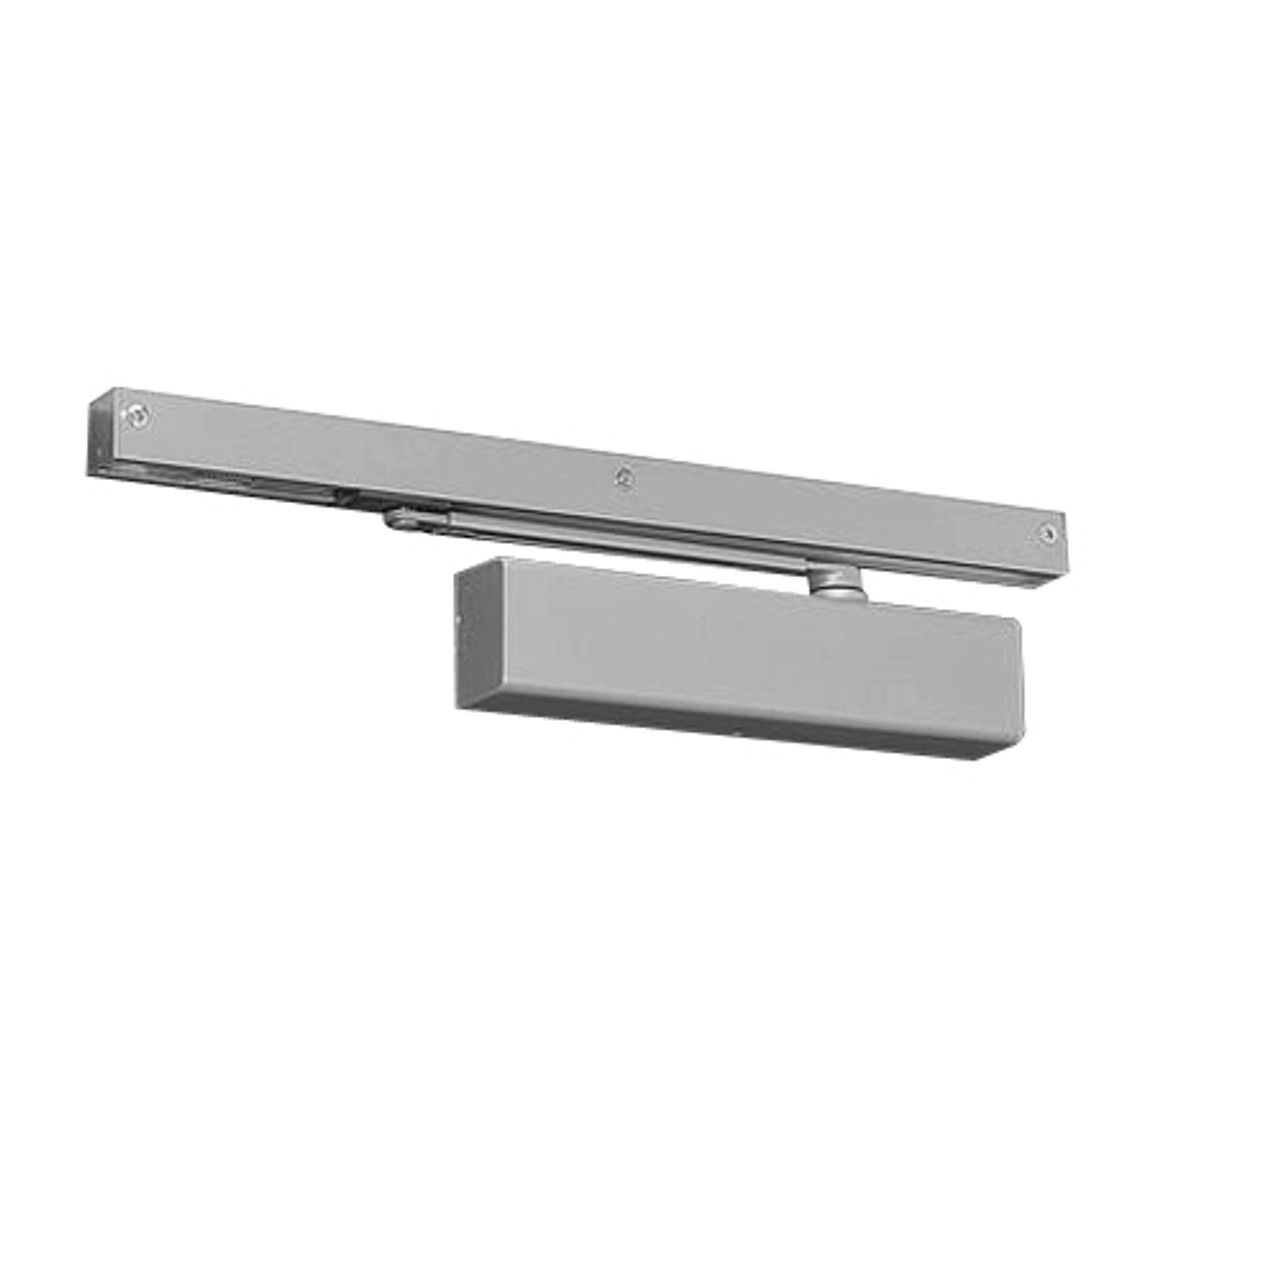 7500STH-M-689 Norton 7500 Series Hold Open Institutional Door Closer with Pull Side Slide Track in Aluminum Finish